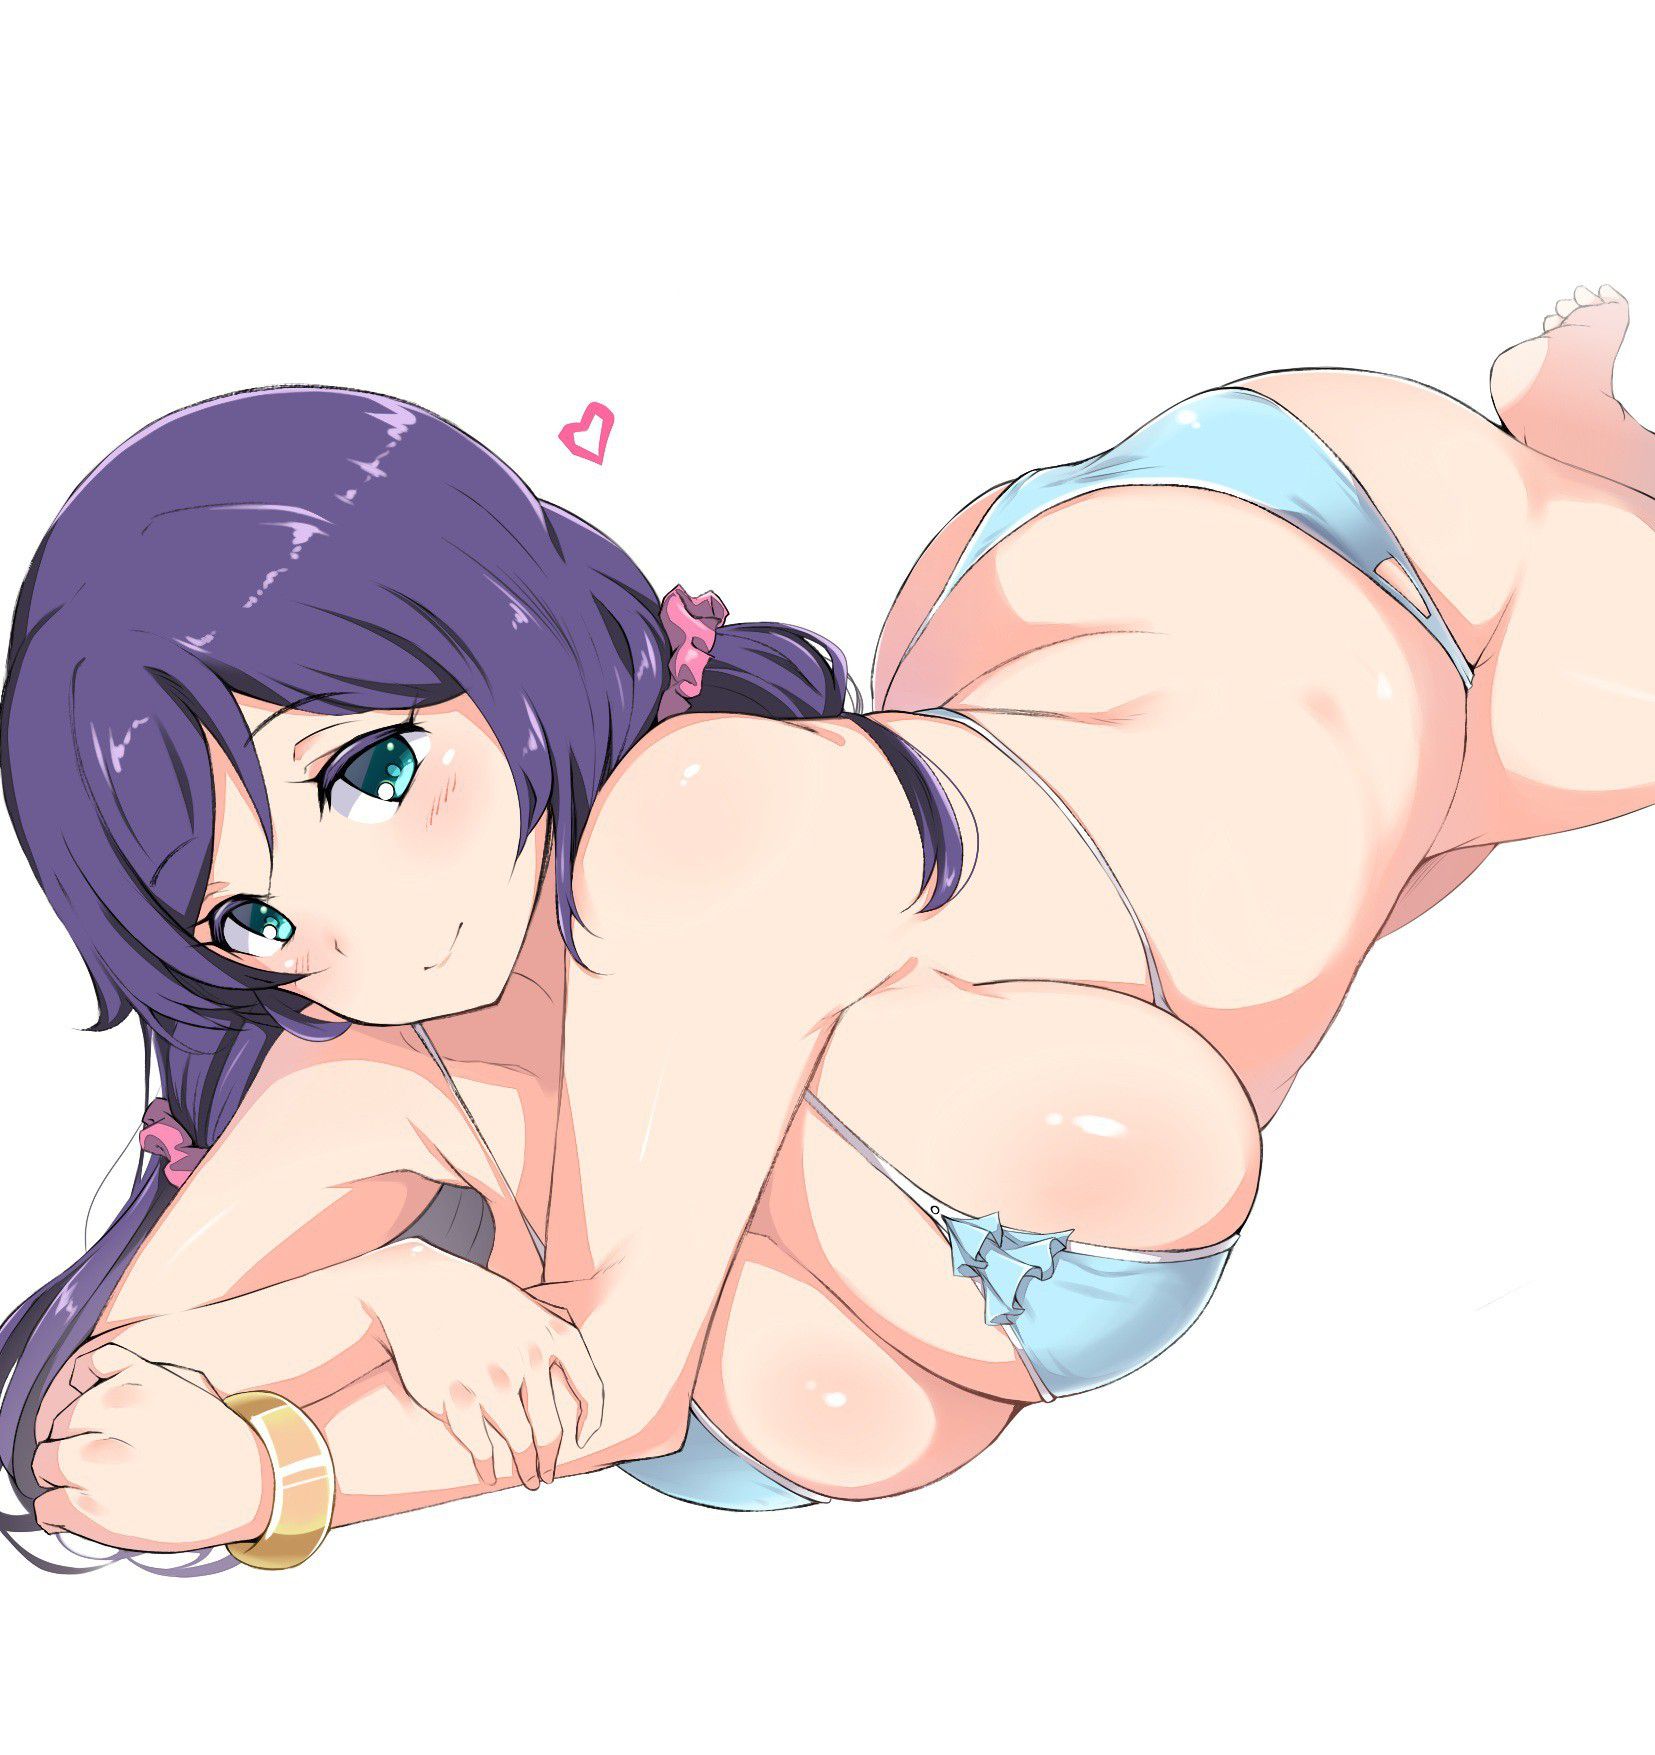 Lewd Love live erotic! Images of the Eleven 24